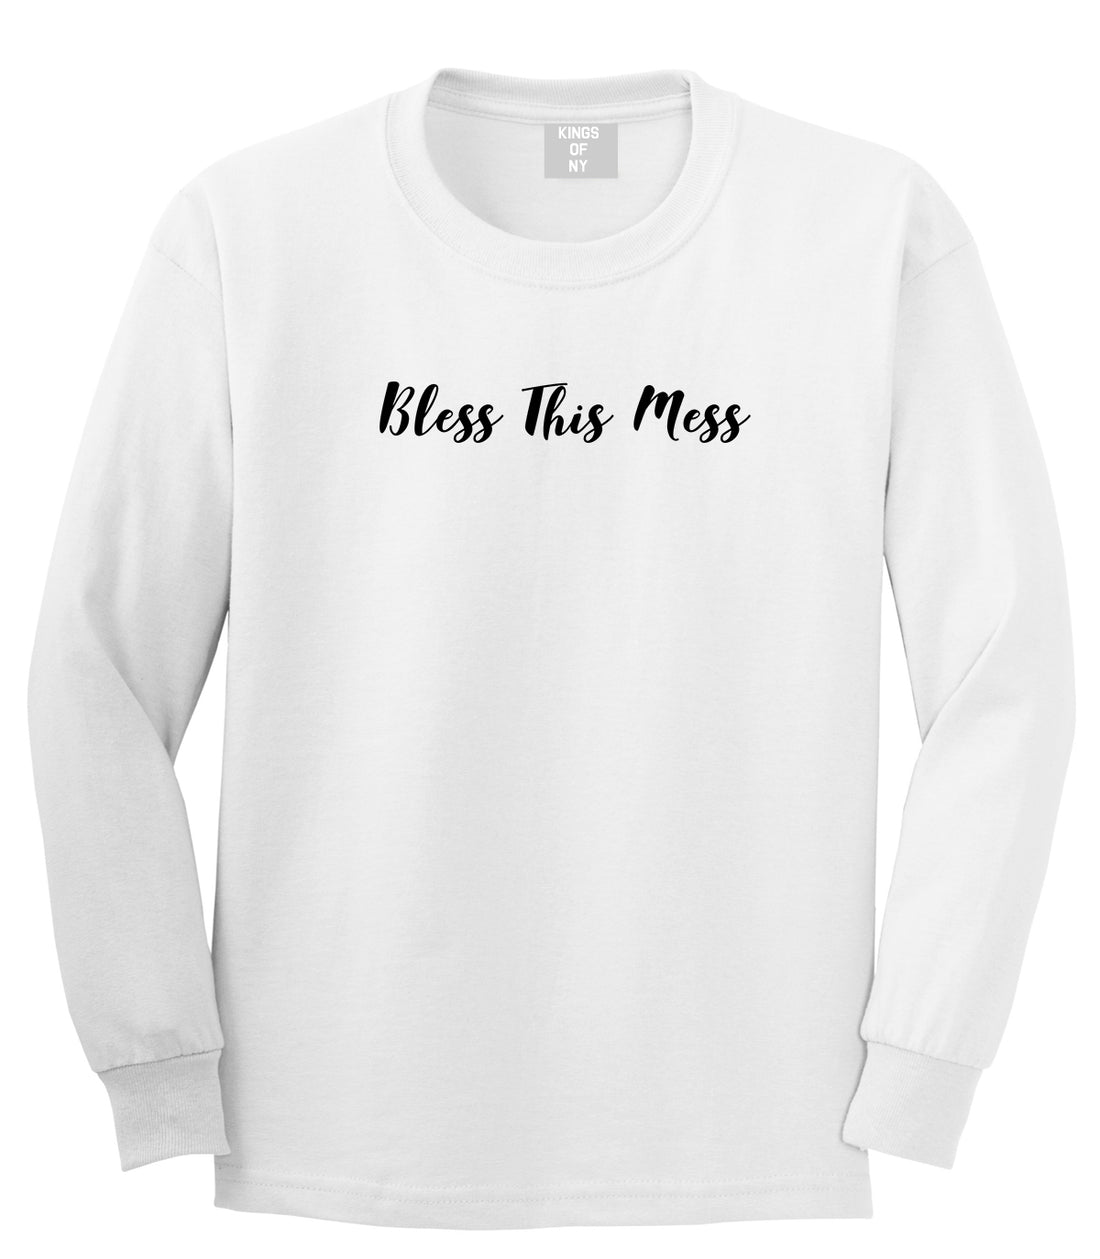 Bless This Mess White Long Sleeve T-Shirt by Kings Of NY